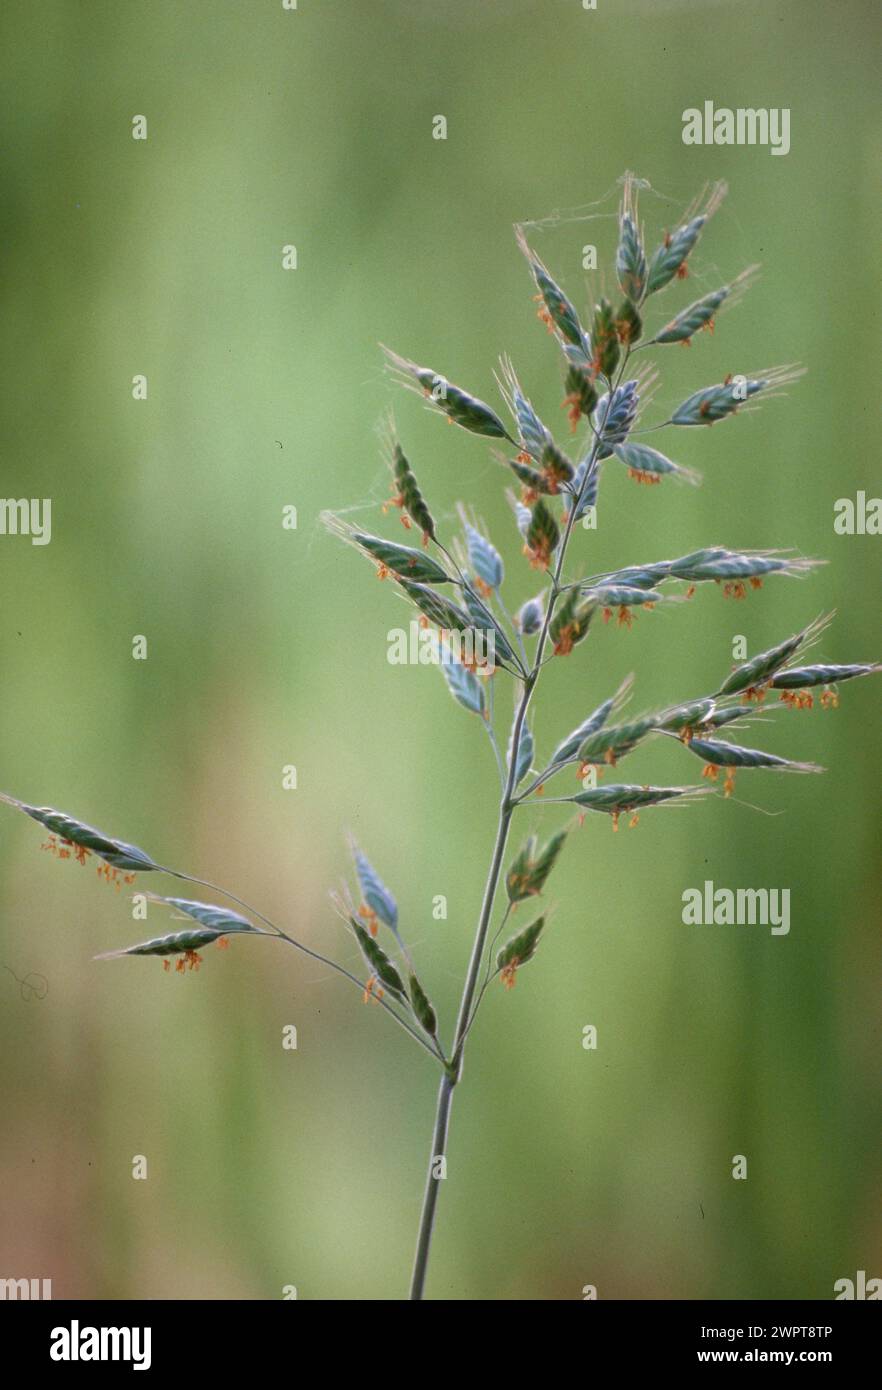 Close-up of a blade of grass with green blurred background in daylight Panicle grass Grass pollen Poa annua Stock Photo